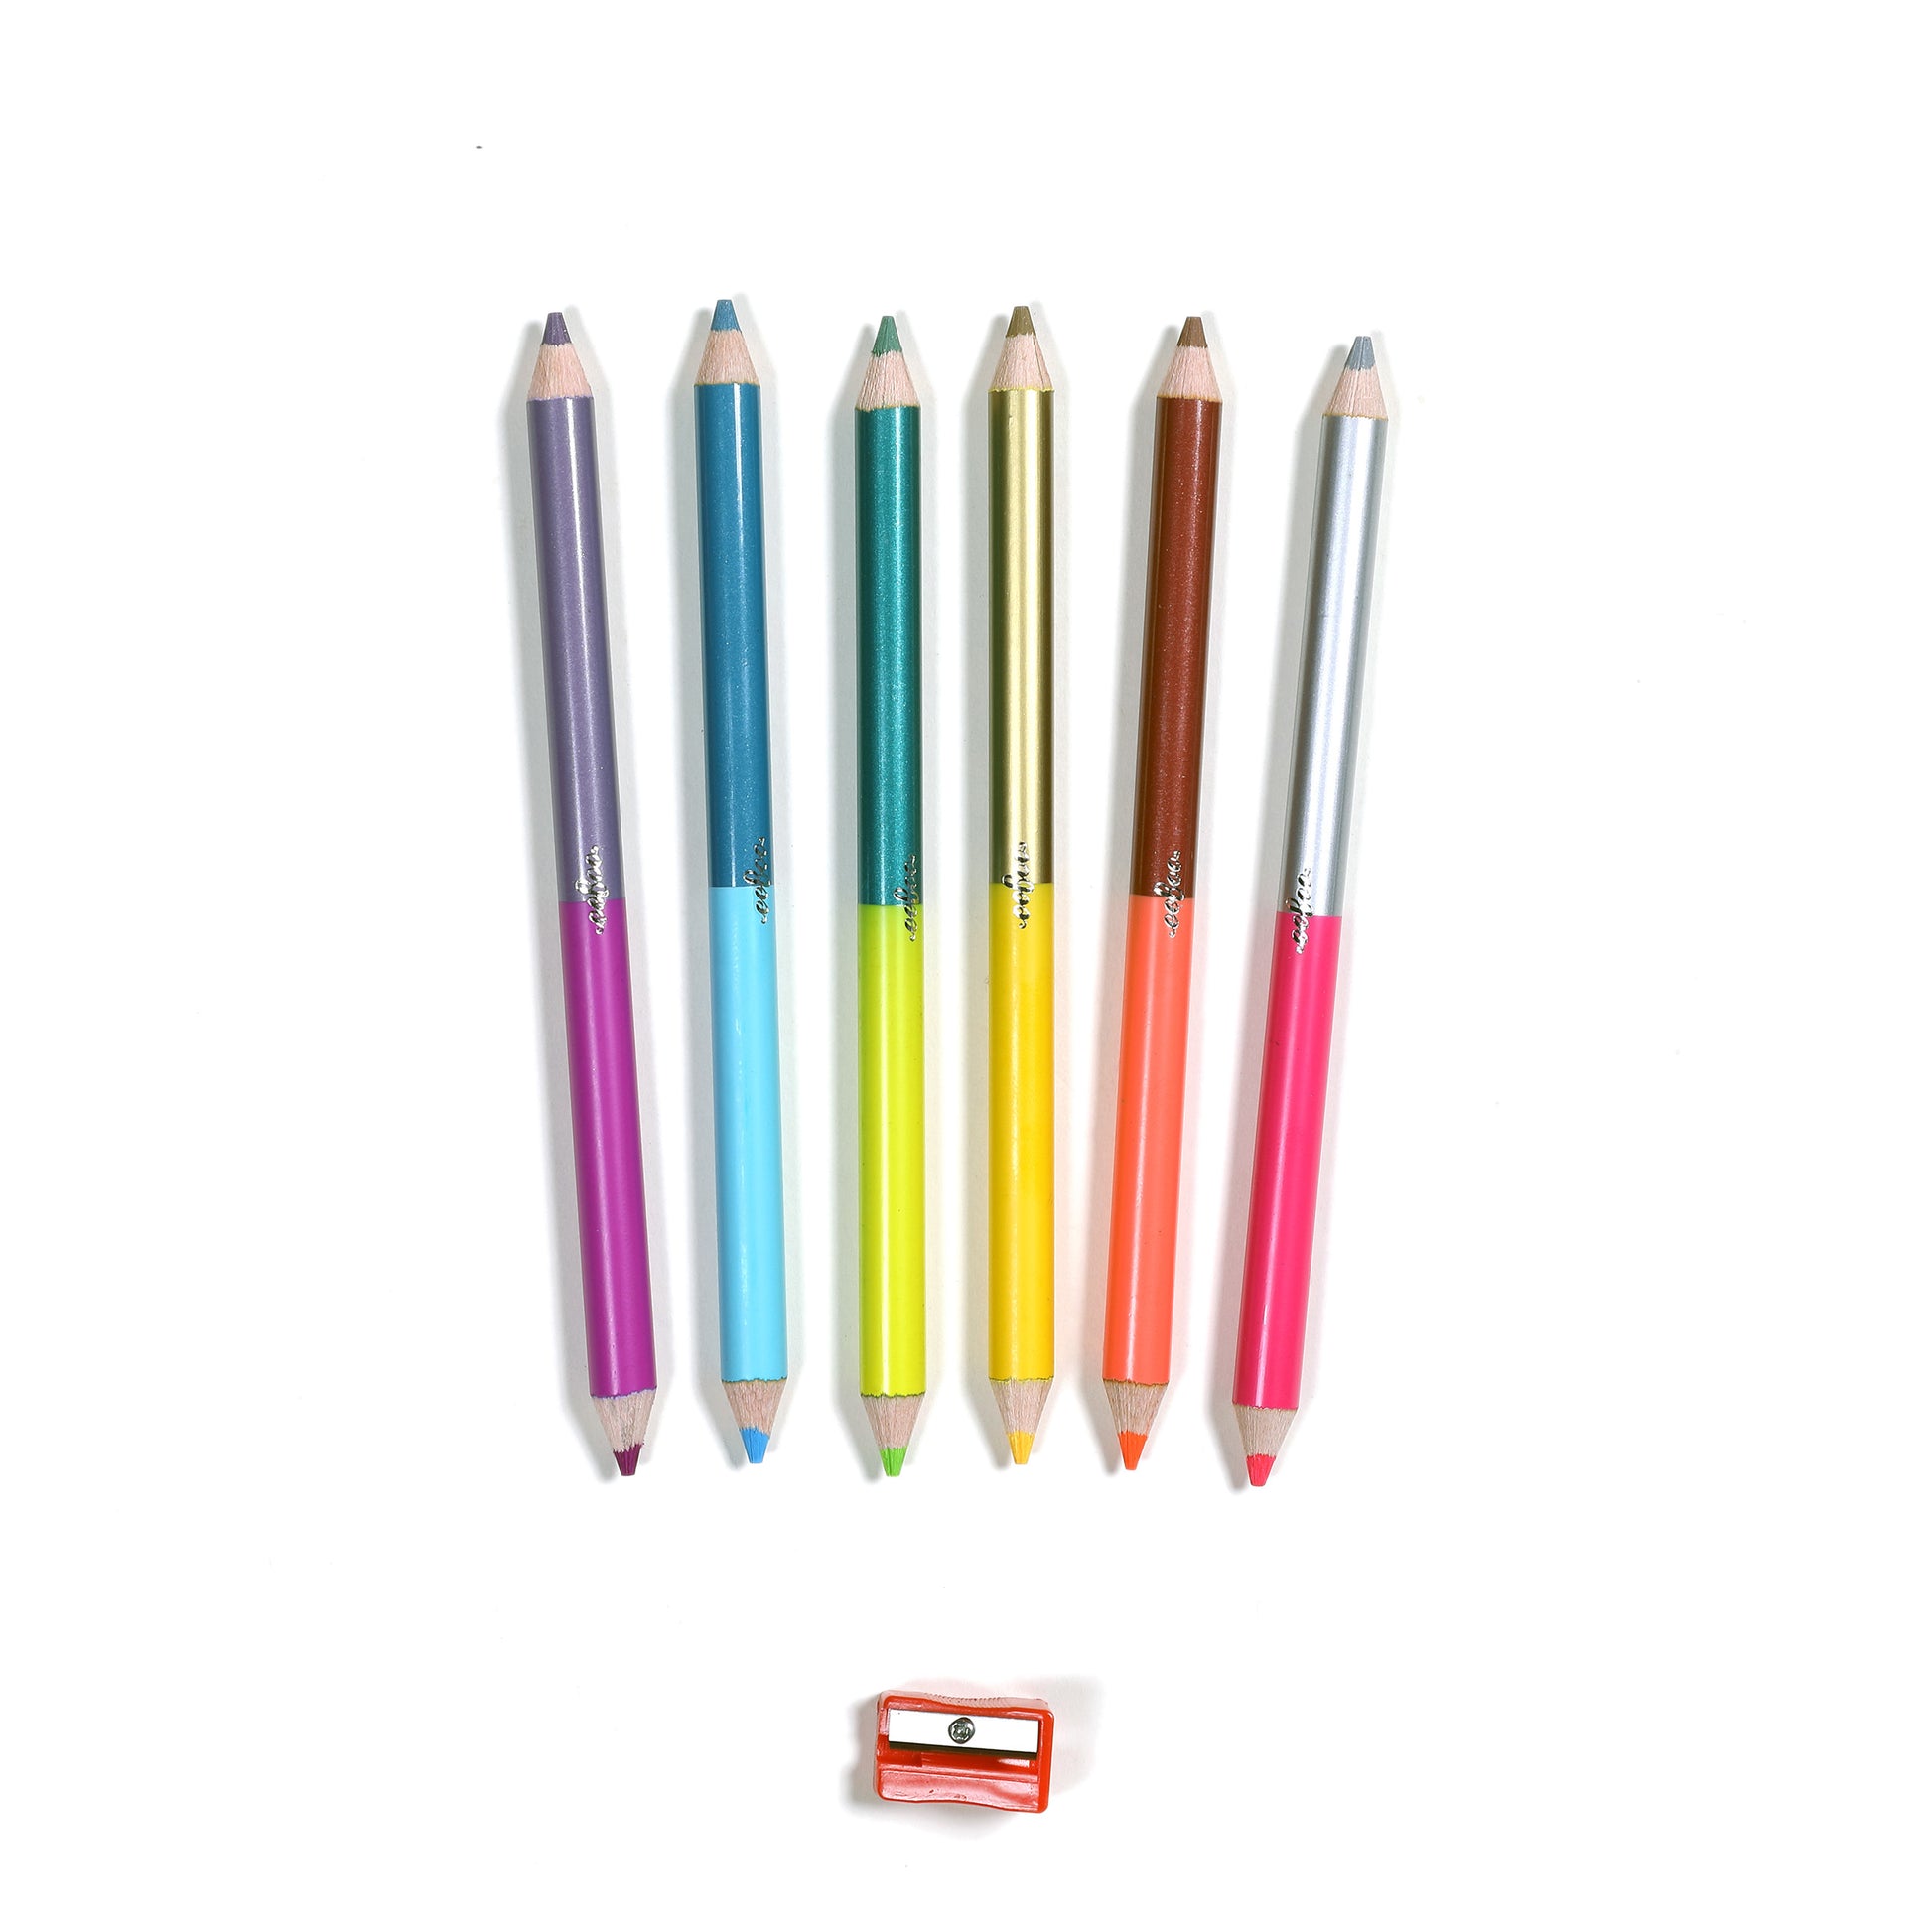 eeBoo Sketchbook and Color Pencil Kits Art Supplies for Kids & Adults